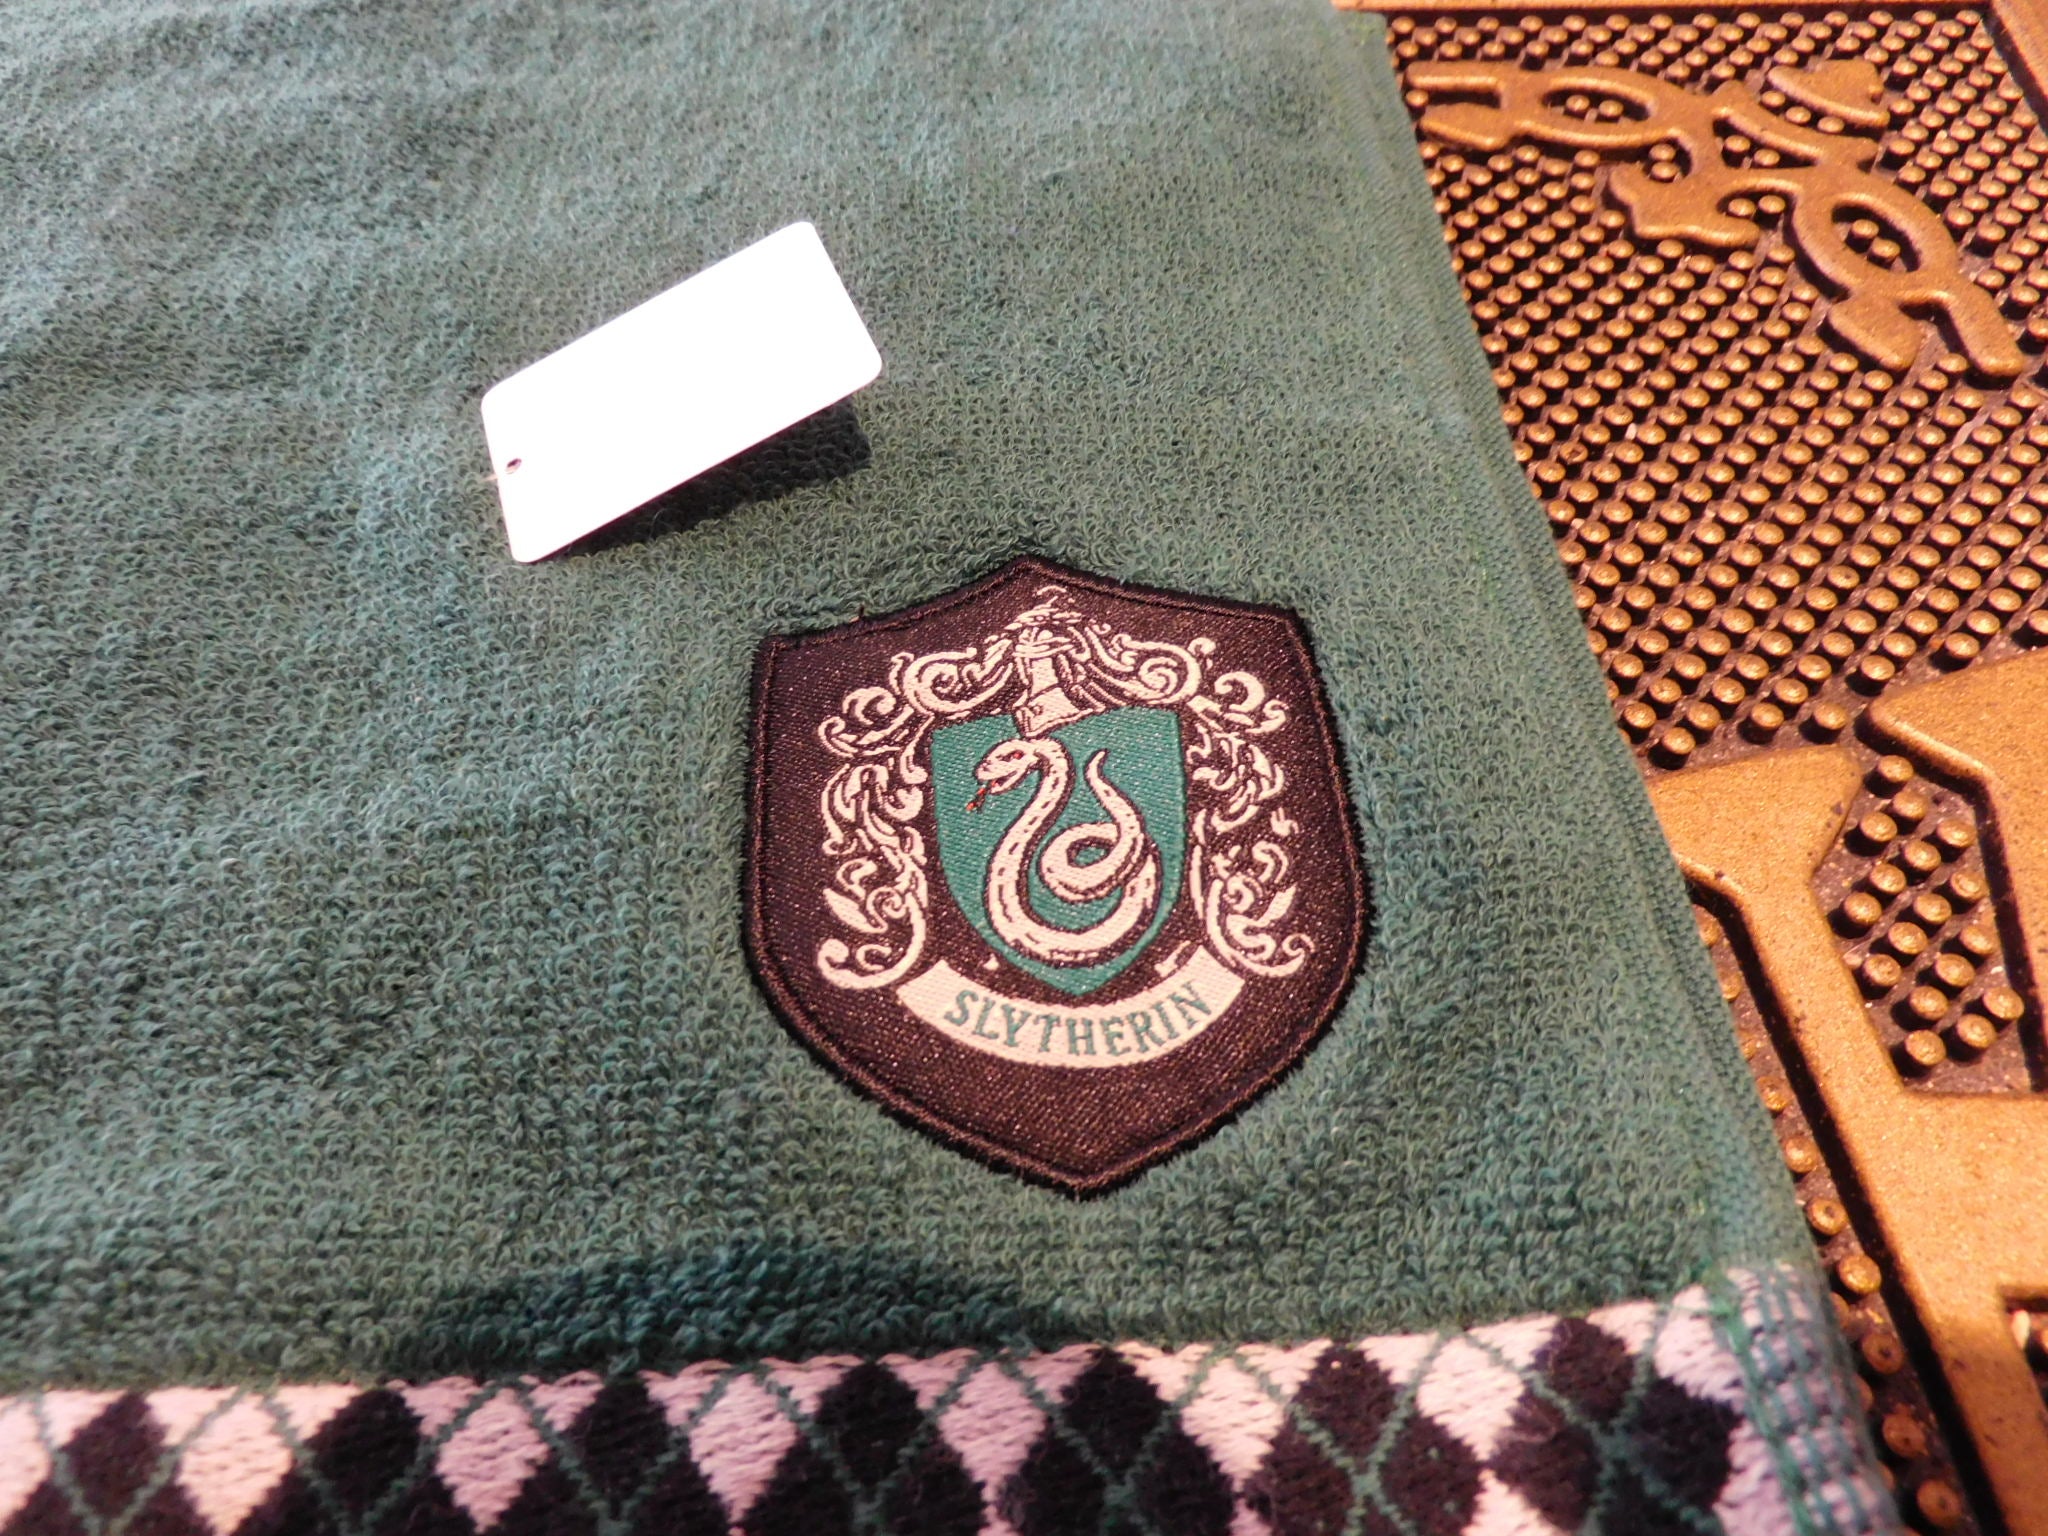 Harry Potter - Slytherin Hand Towels 25x25cm